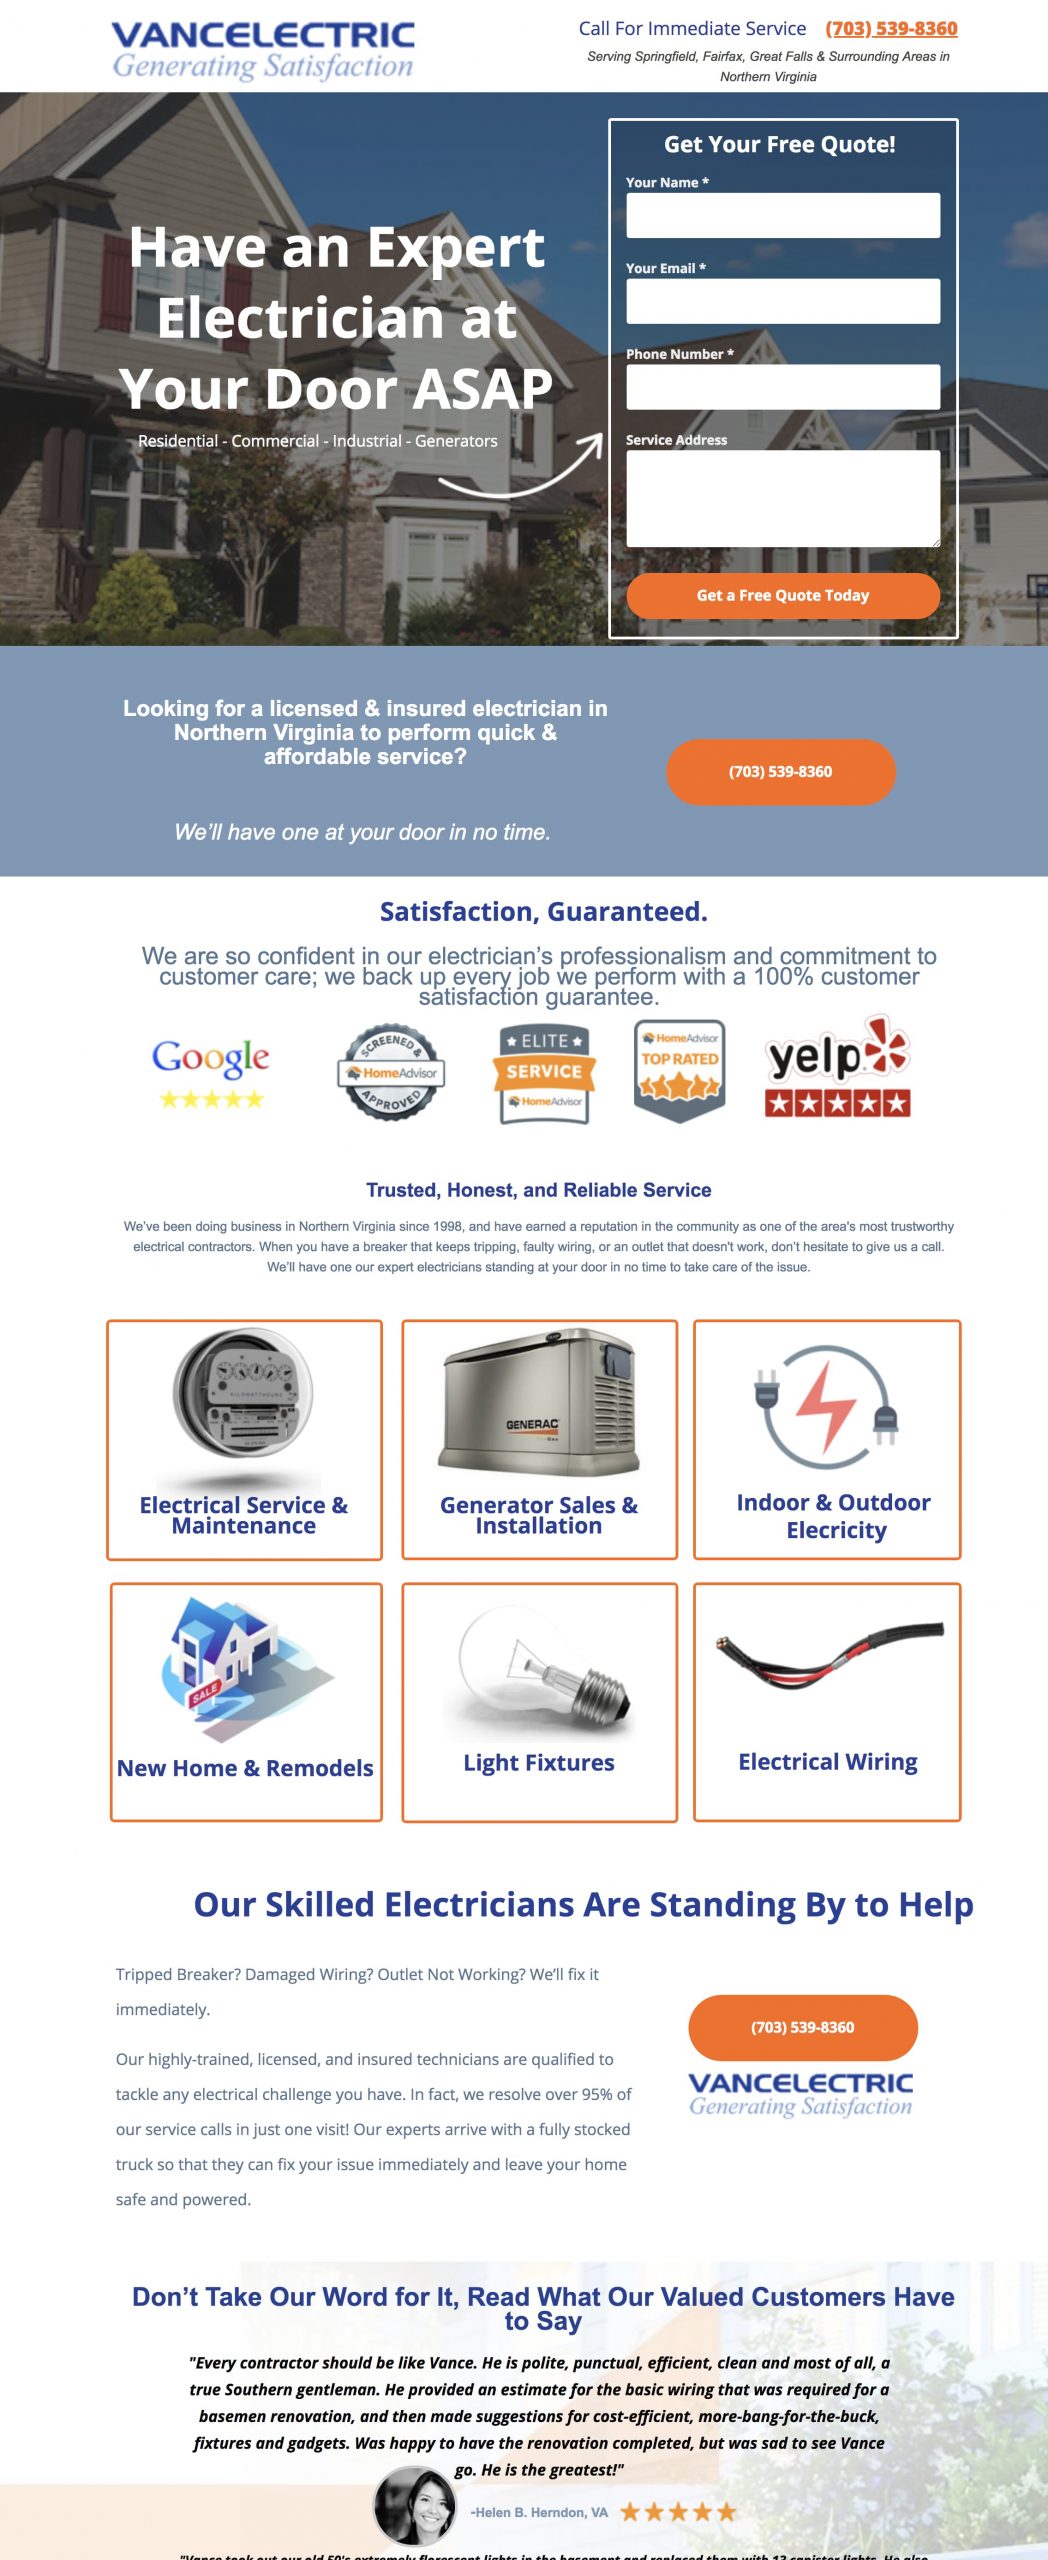 Vancelectric Landing Page scaled 1